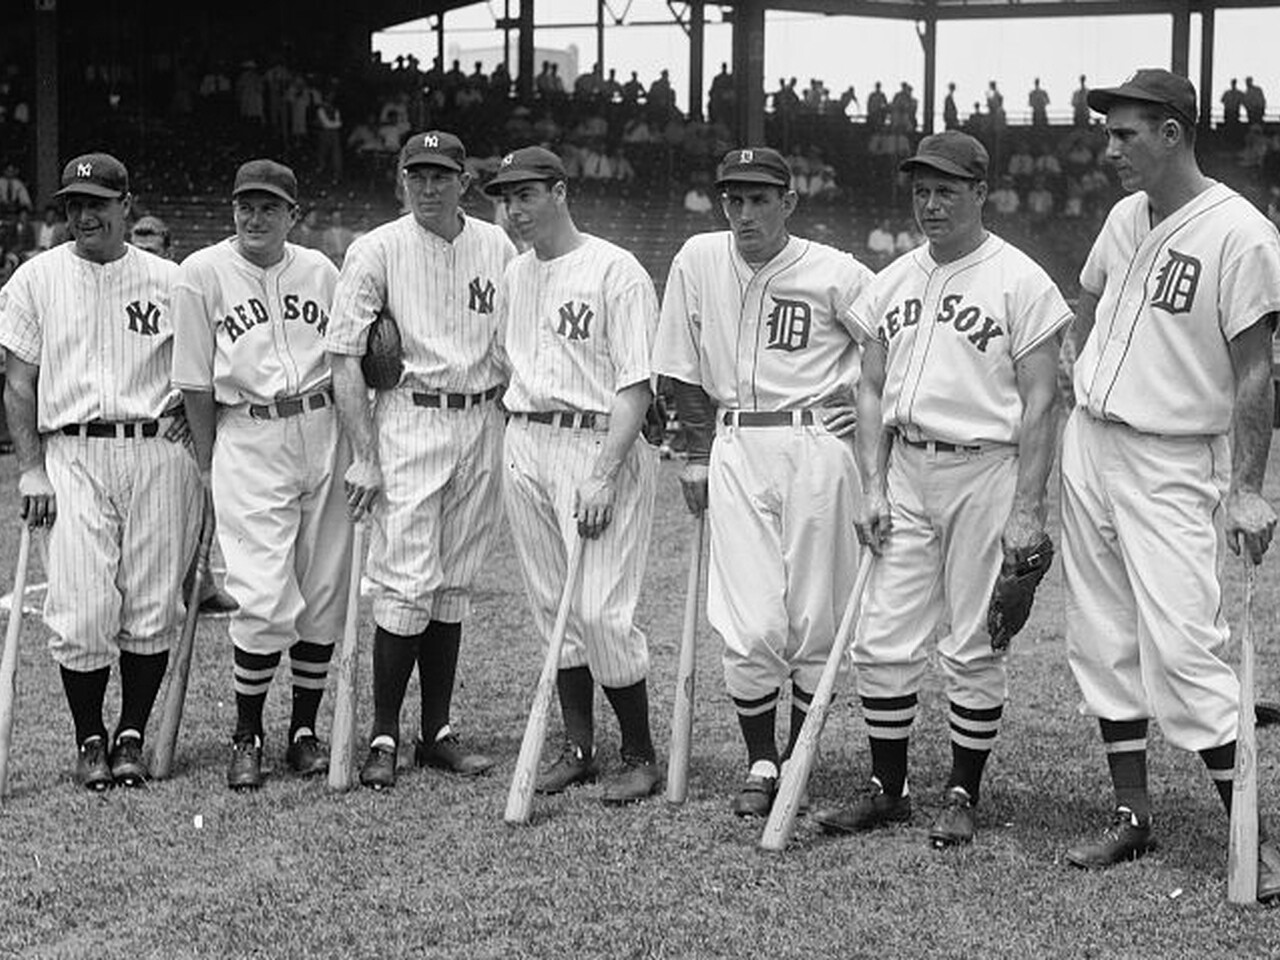 Baseball players in Washington DC on July 7, 1937: (from left to right) Lou Gehrig, Joe Cronin, Bill Dickey, Joe DiMaggio, Charley Gehringer, Jimmie Foxx, and Hank Greenberg. Photographed by Harris & Ewing. (Library of Congress)